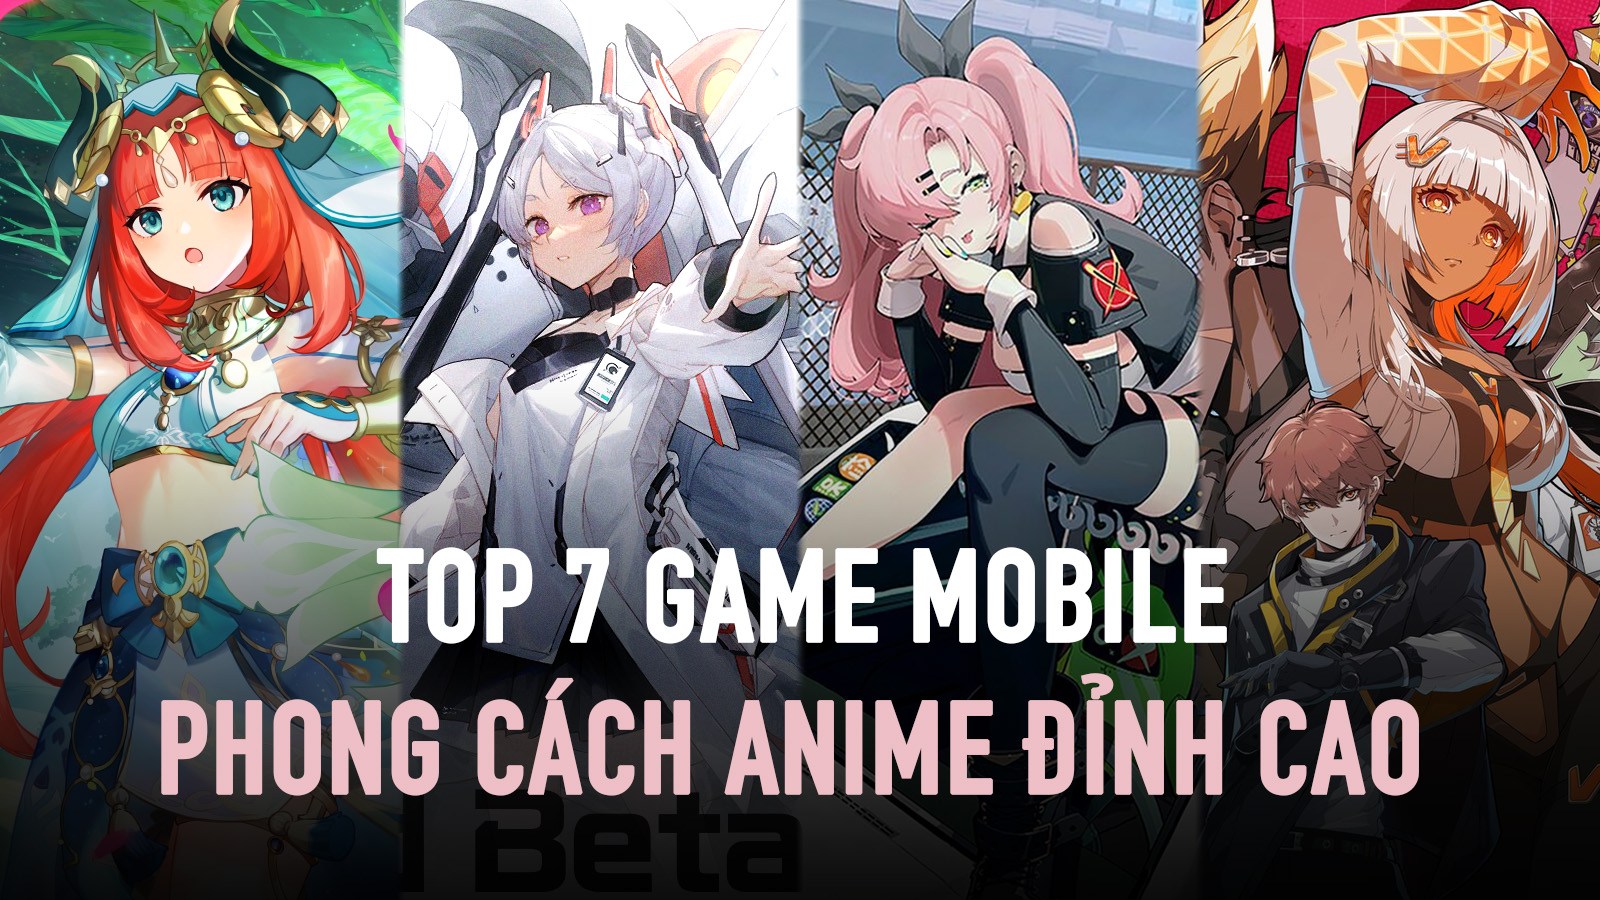 10 Anime Mobile Games Perfect for Your Smartphone - MyAnimeList.net